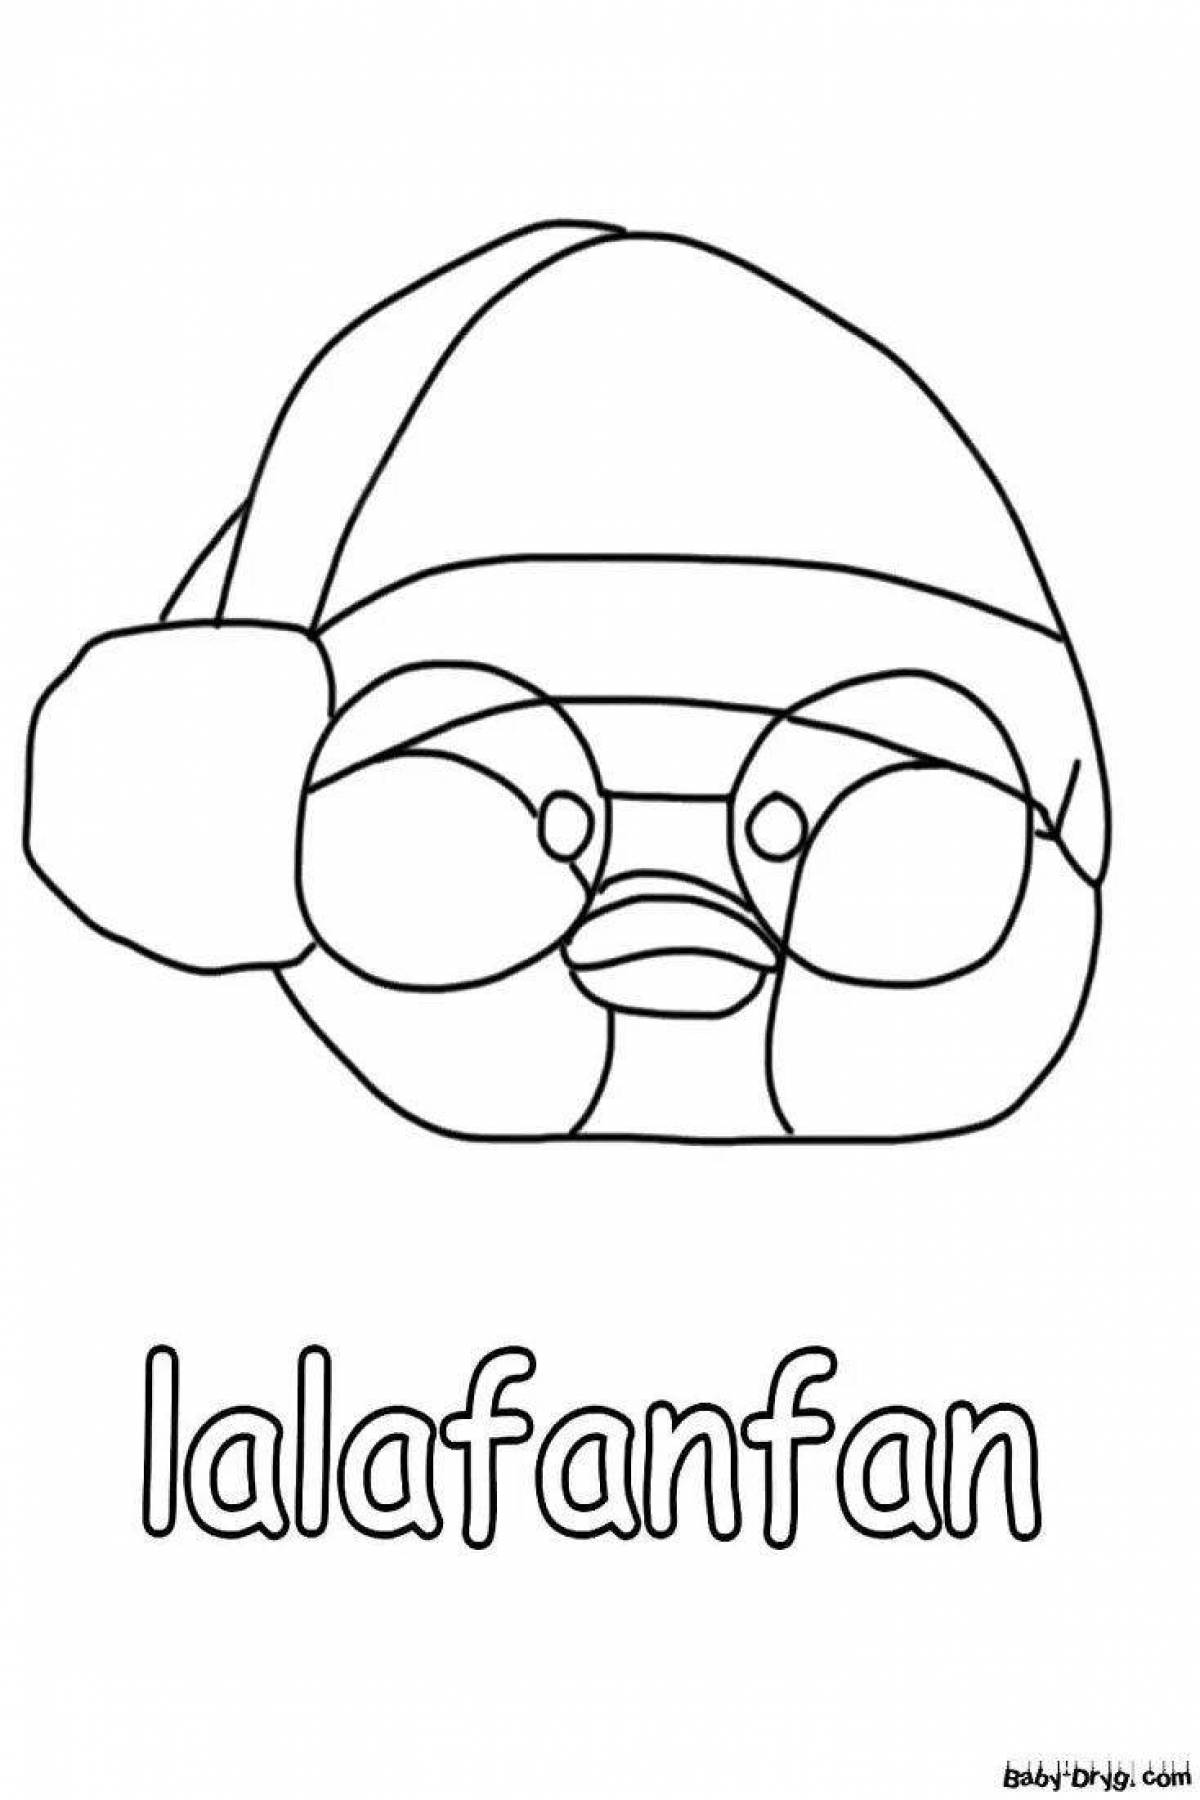 Radiant lafanfan duck coloring page